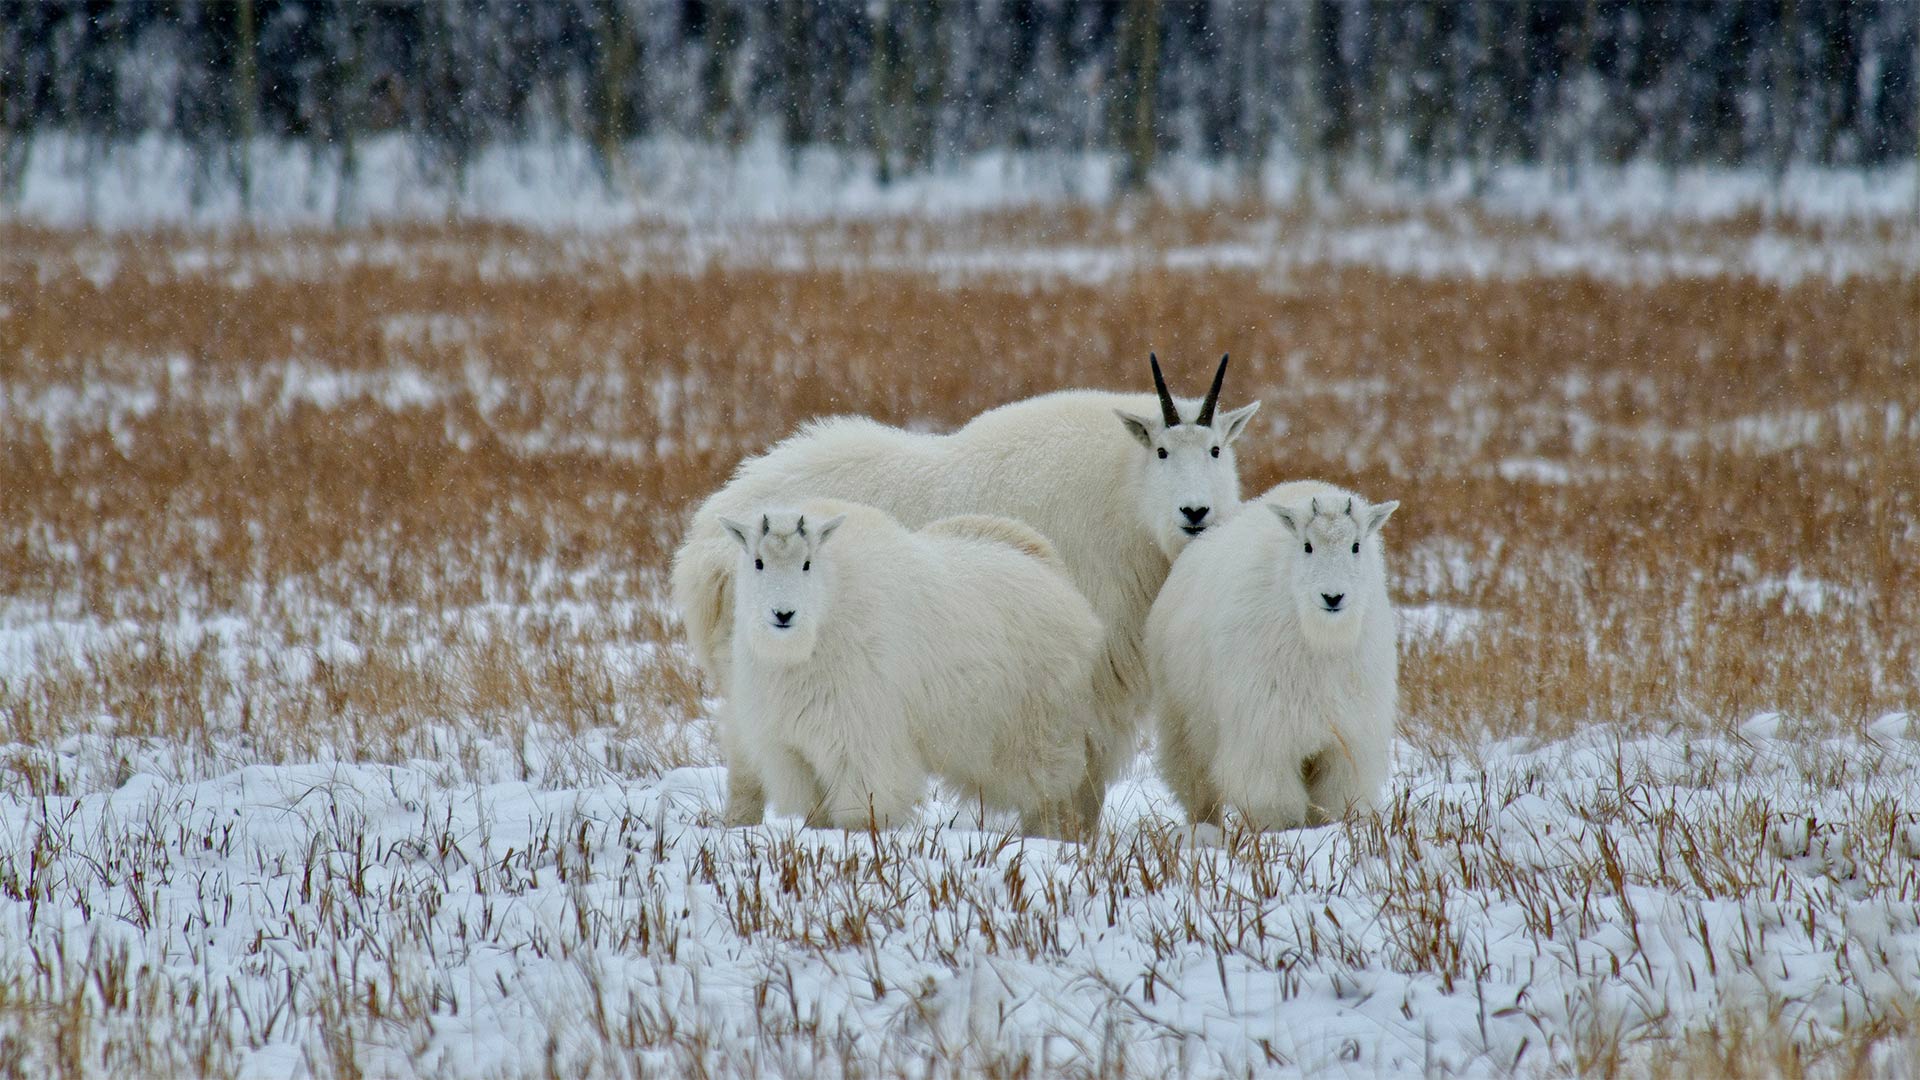 Mountain goats in the Yukon, Canada - Mark Newman/Getty Images)